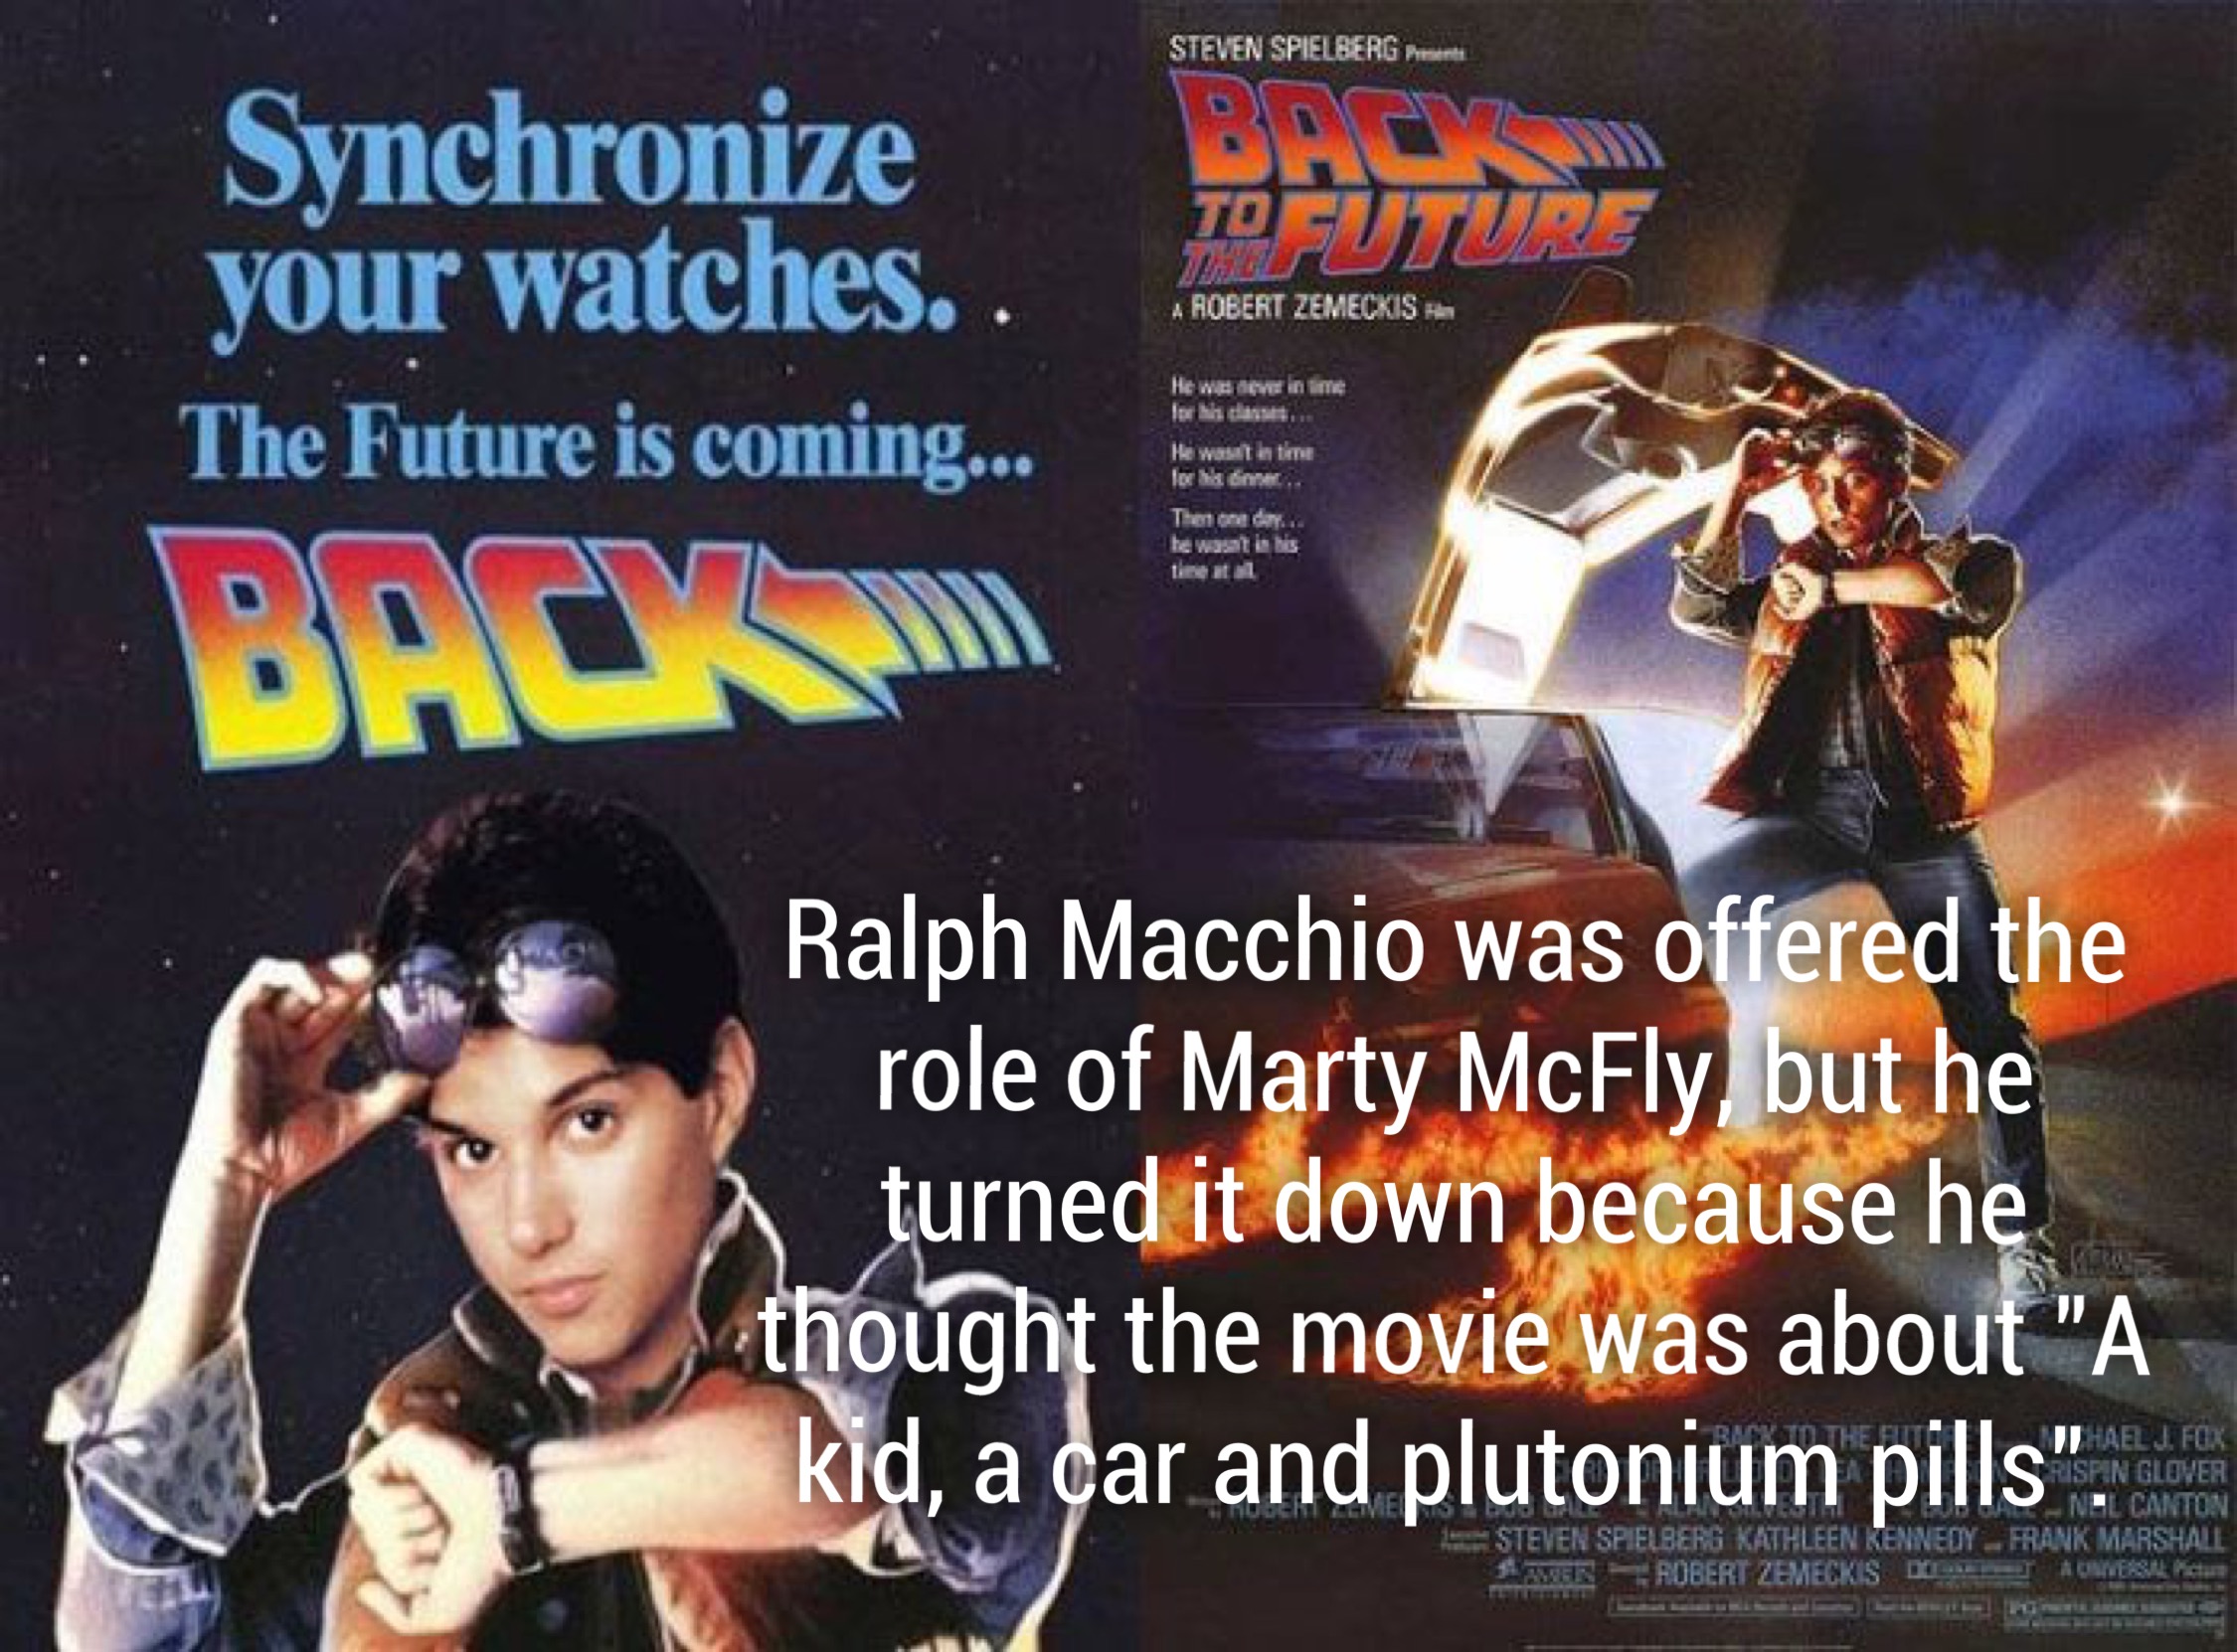 fact about the back to the future - Steven Spielberg Synchronize your watches.. The Future is coming... Robert Zemeckis Ralph Macchio was offered the role of Marty McFly, but he turned it down because he thought the movie was about "A kid, a car and pluto